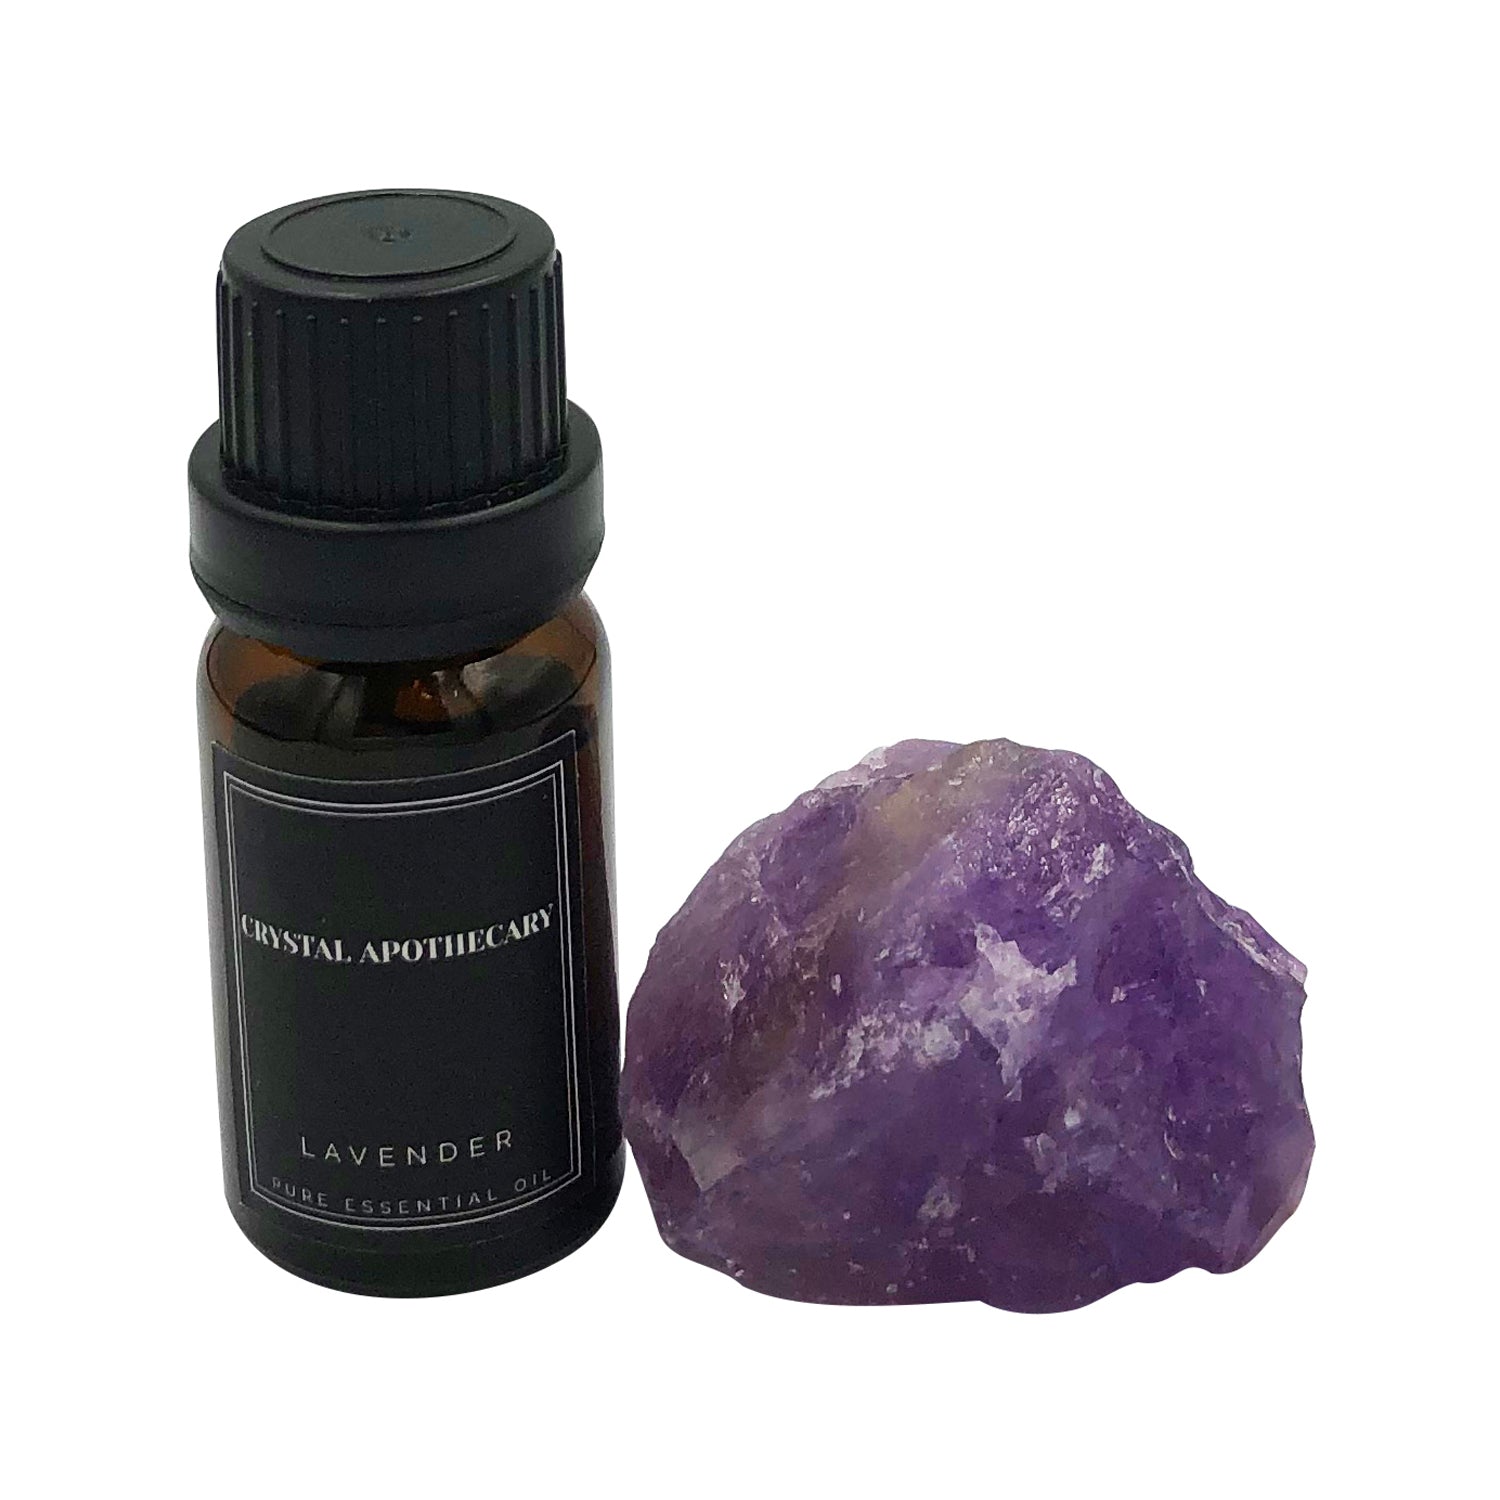 Lavender Pure Essential Oil with Amethyst